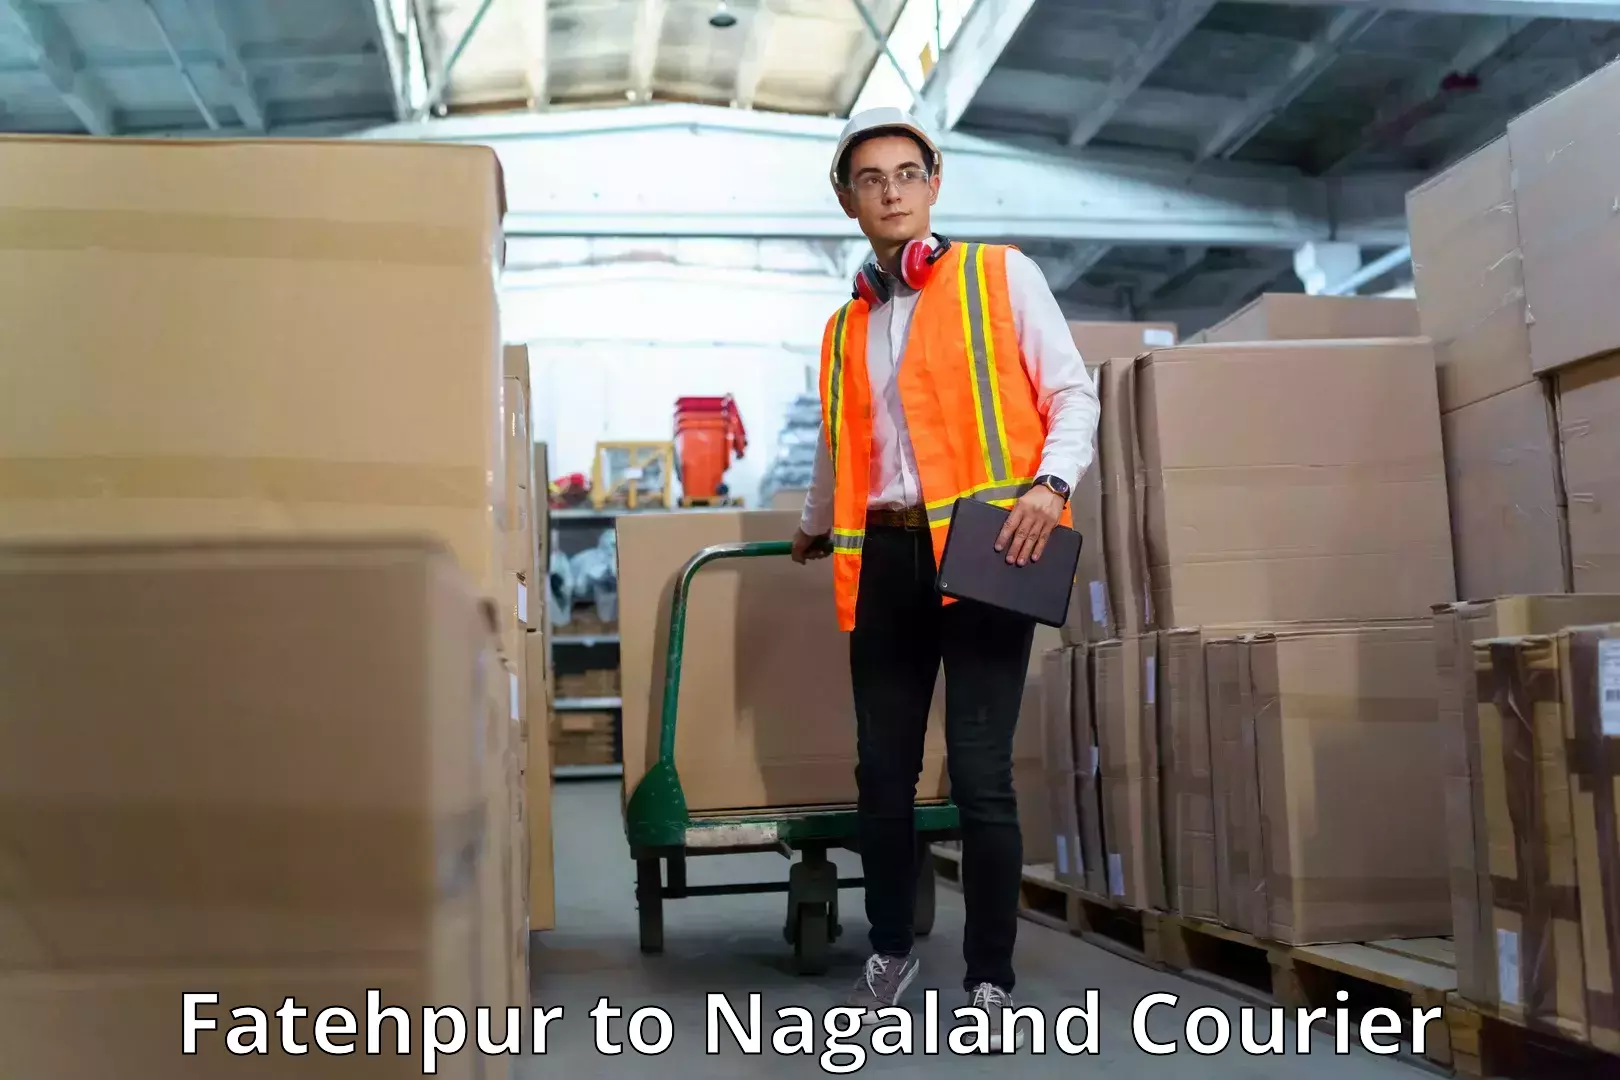 User-friendly delivery service Fatehpur to Nagaland